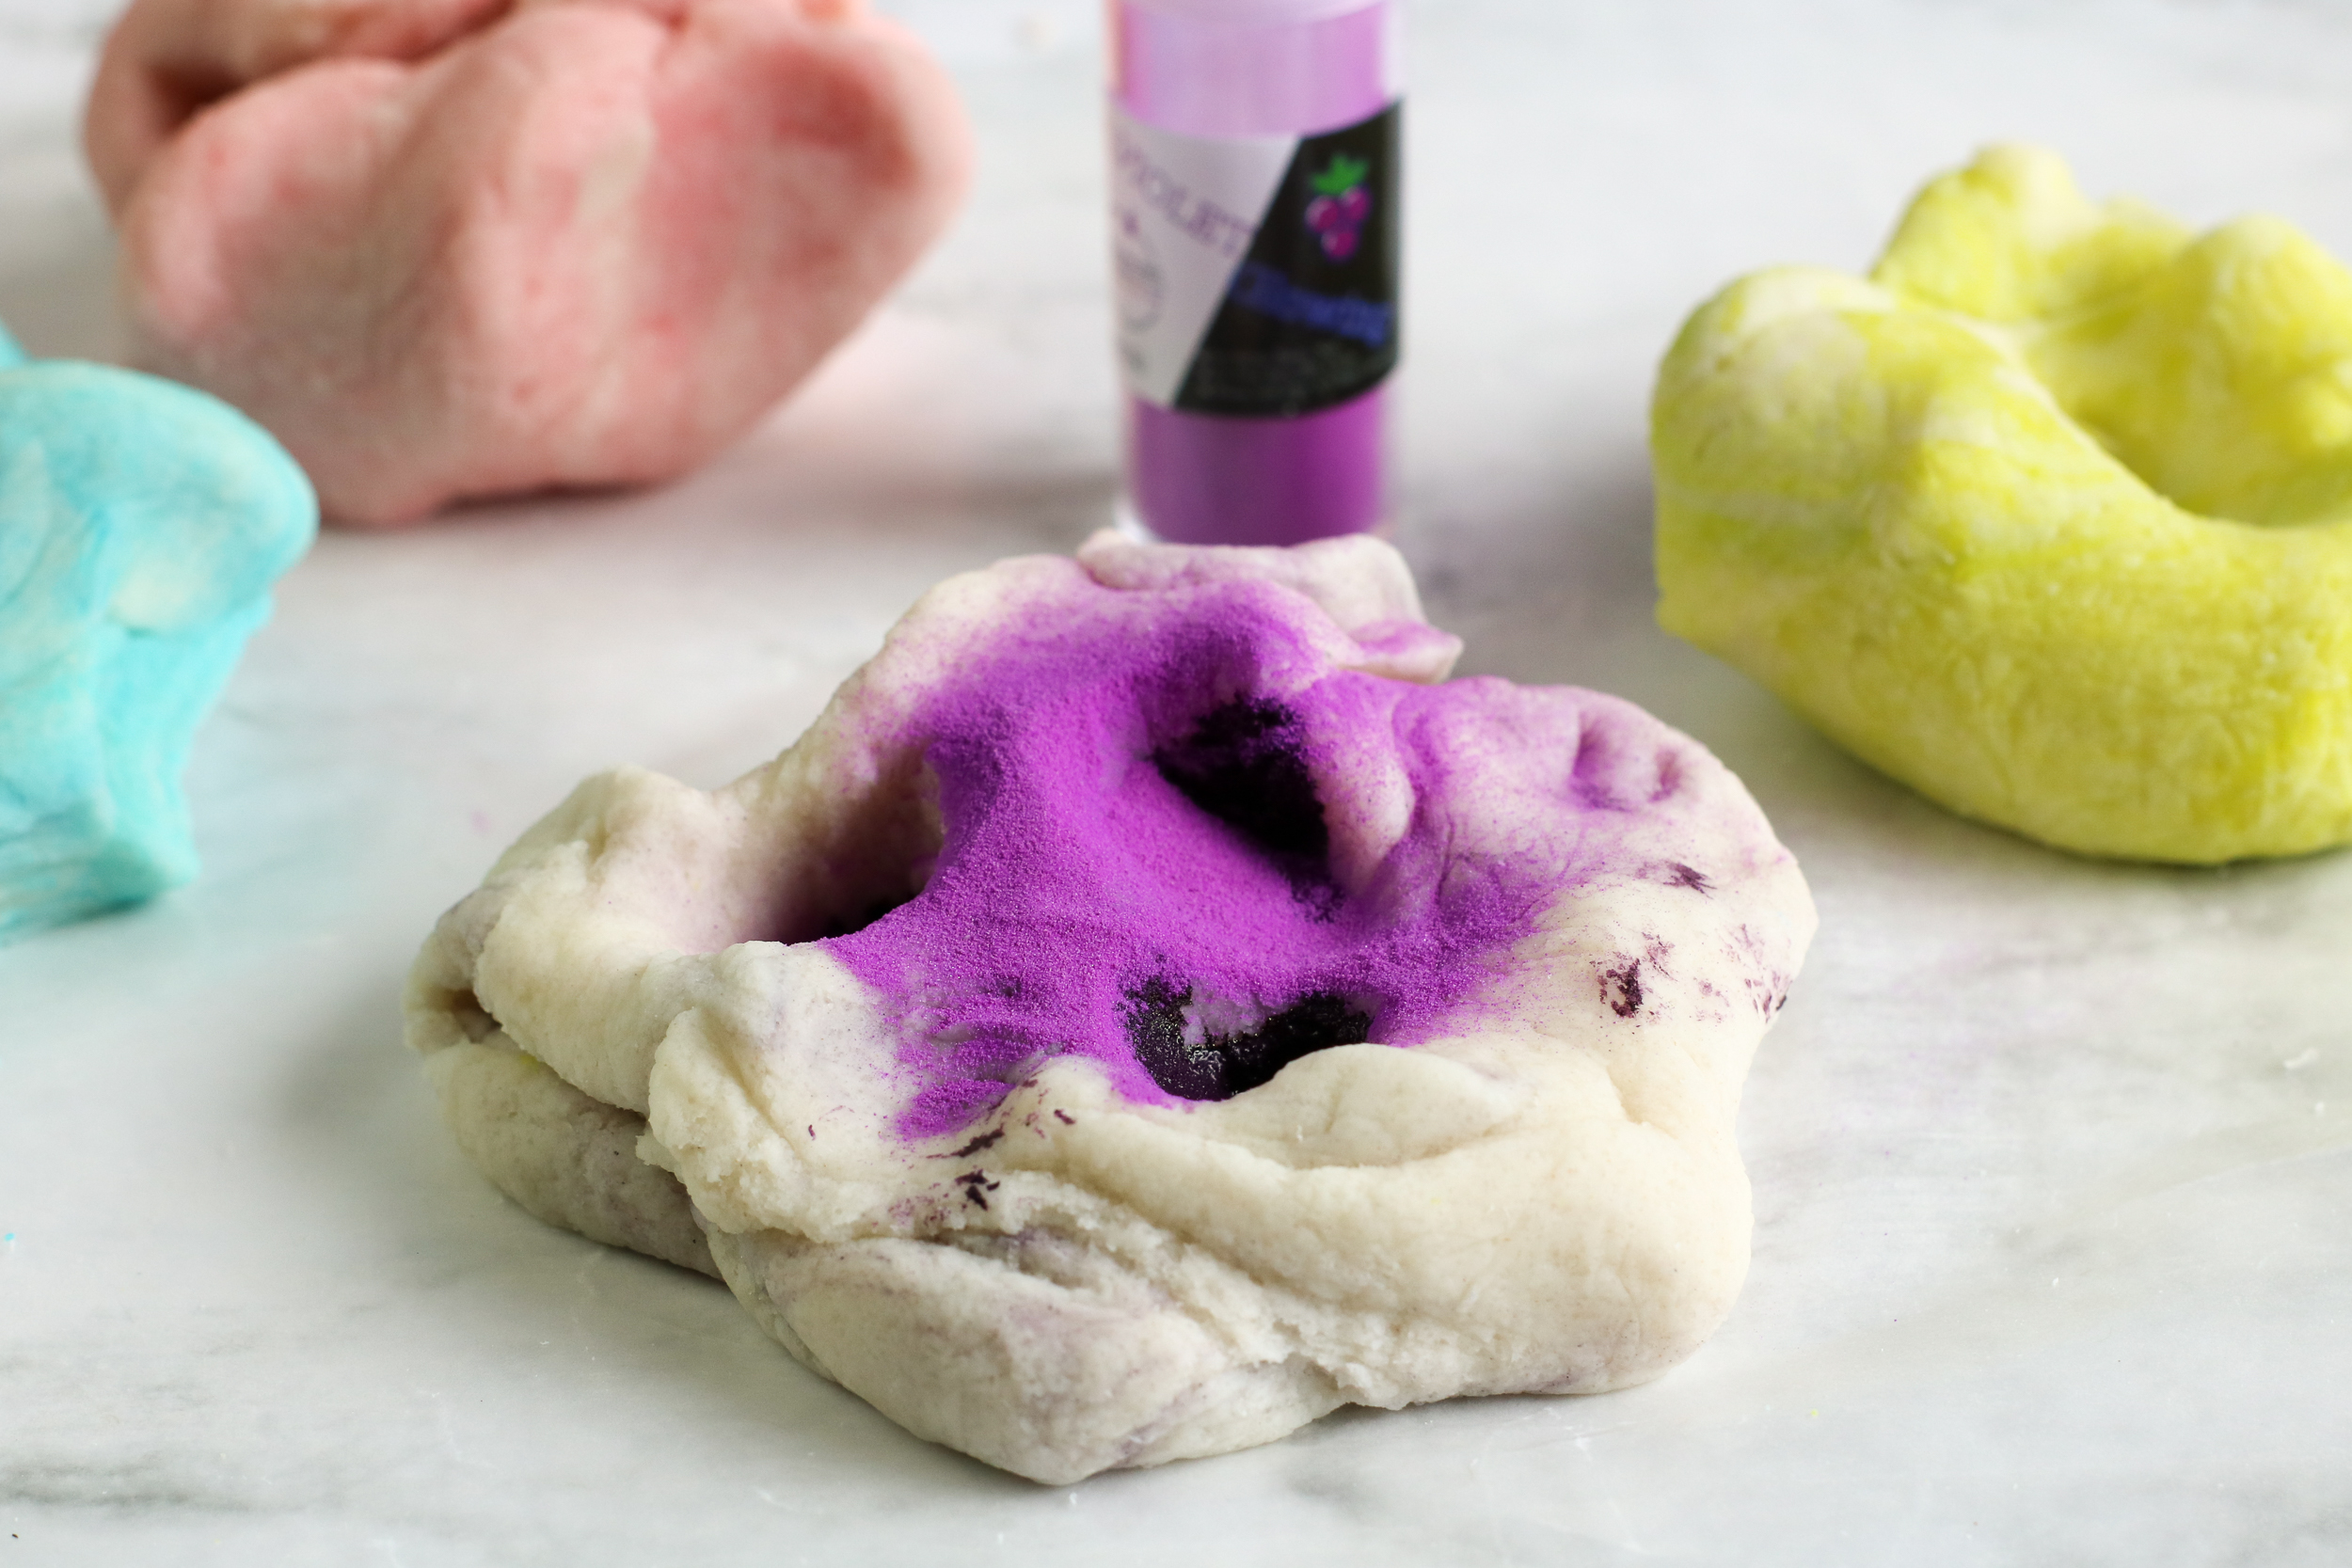 Blending the dough and coloring.